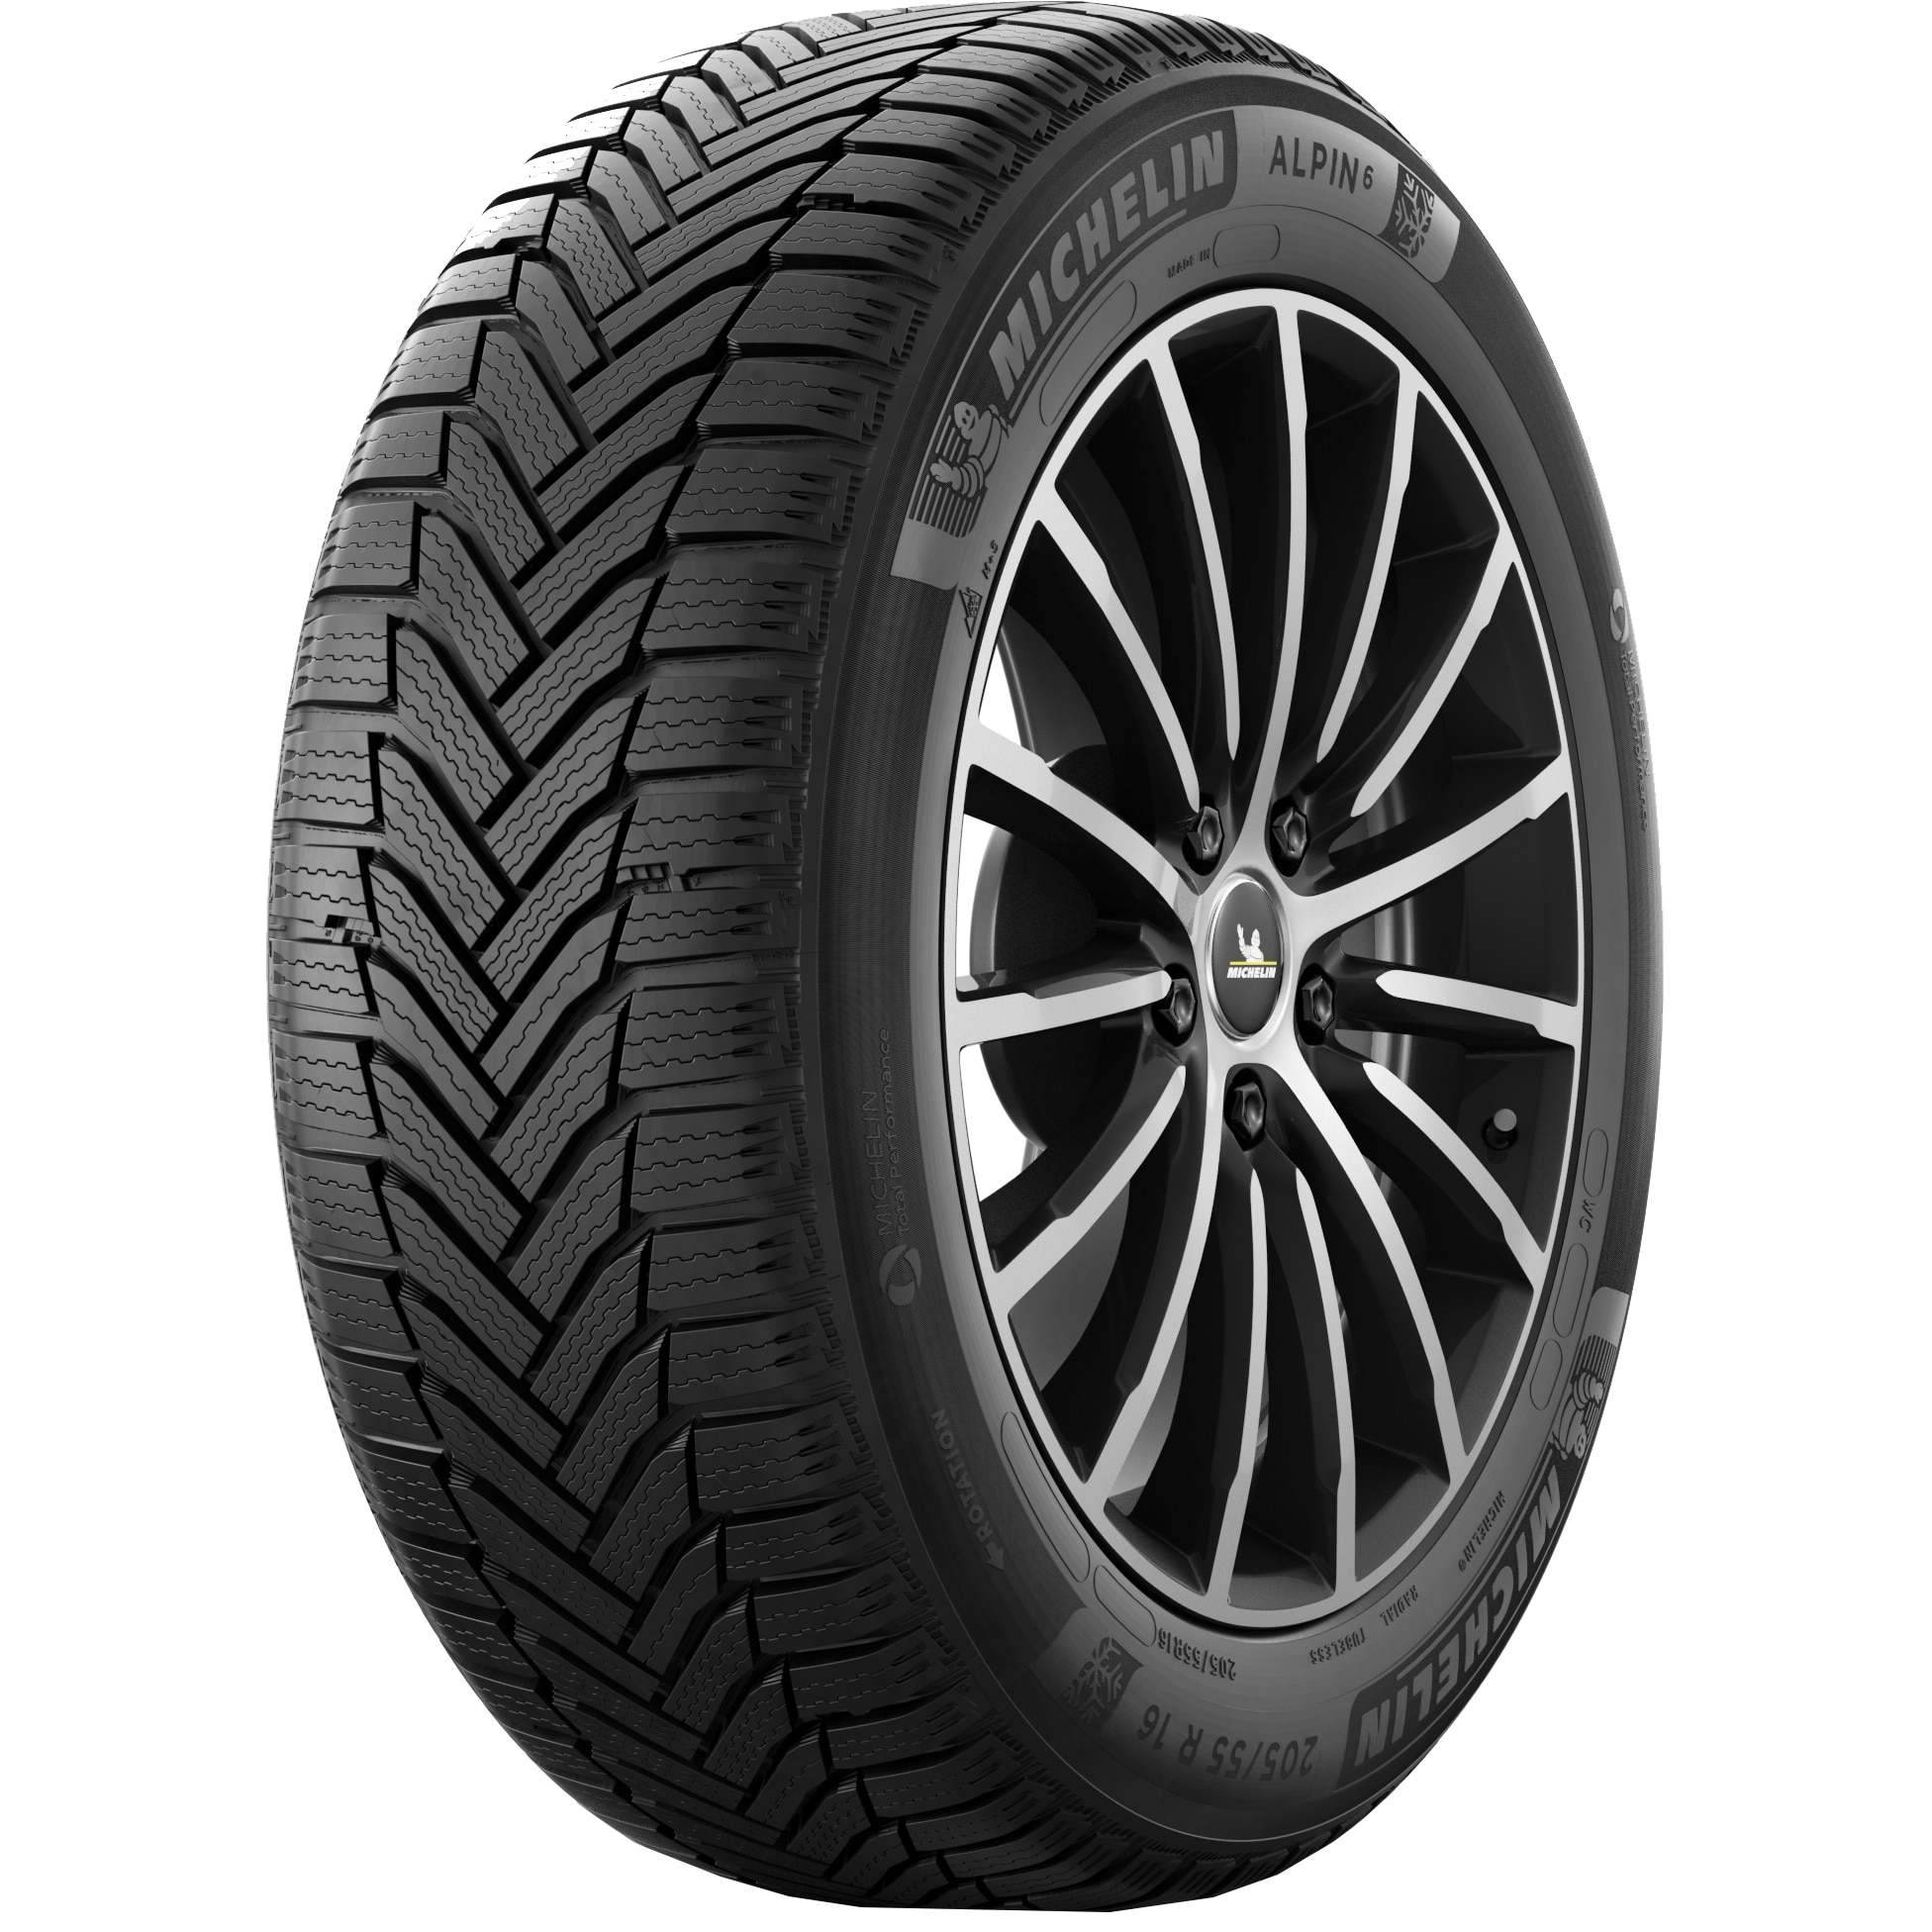 amount of sales Wear out Ash Anvelopa de iarna Michelin ALPIN 6 205/55R16 91T - eMAG.ro